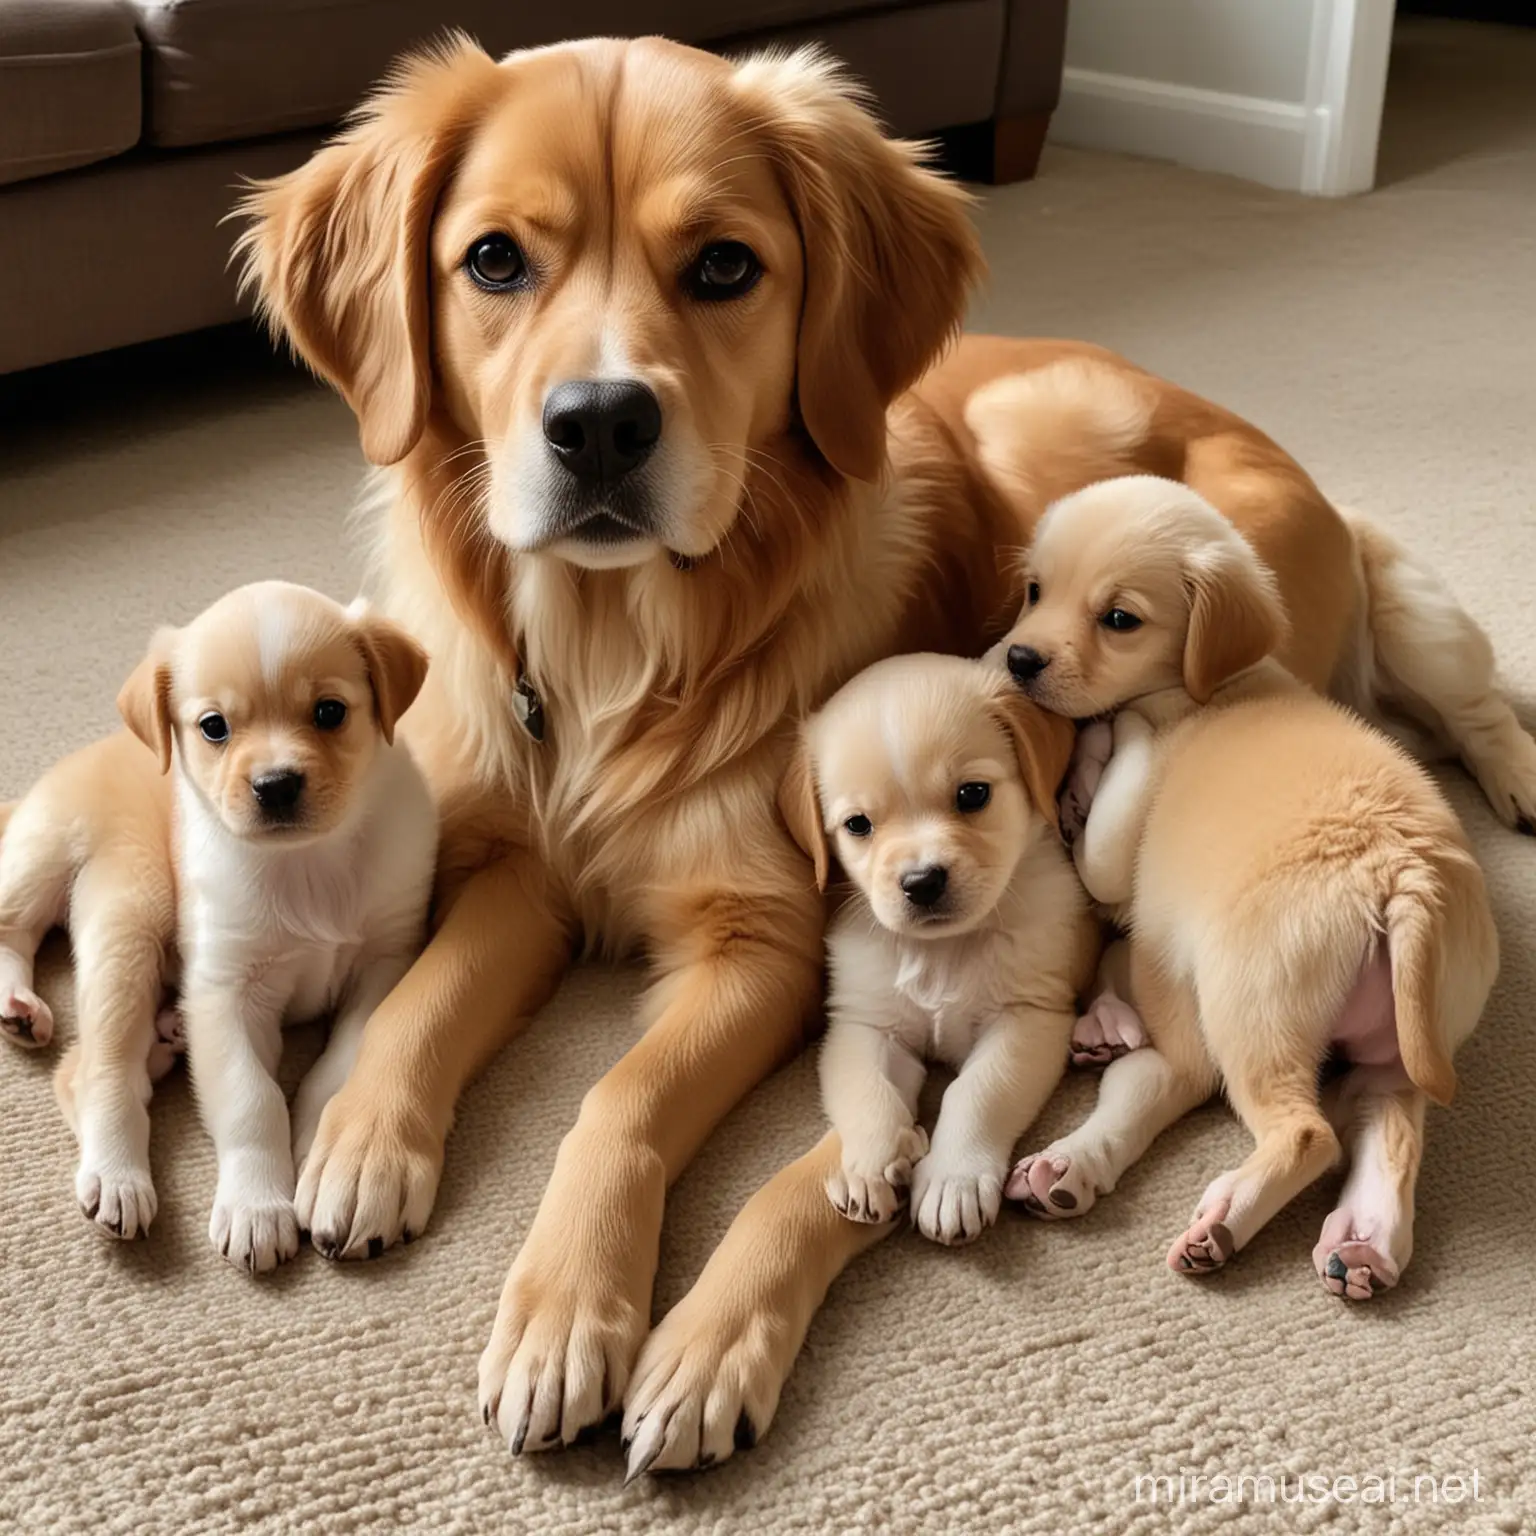 Adorable Realistic Dog with Cute Puppies Heartwarming Family Scene